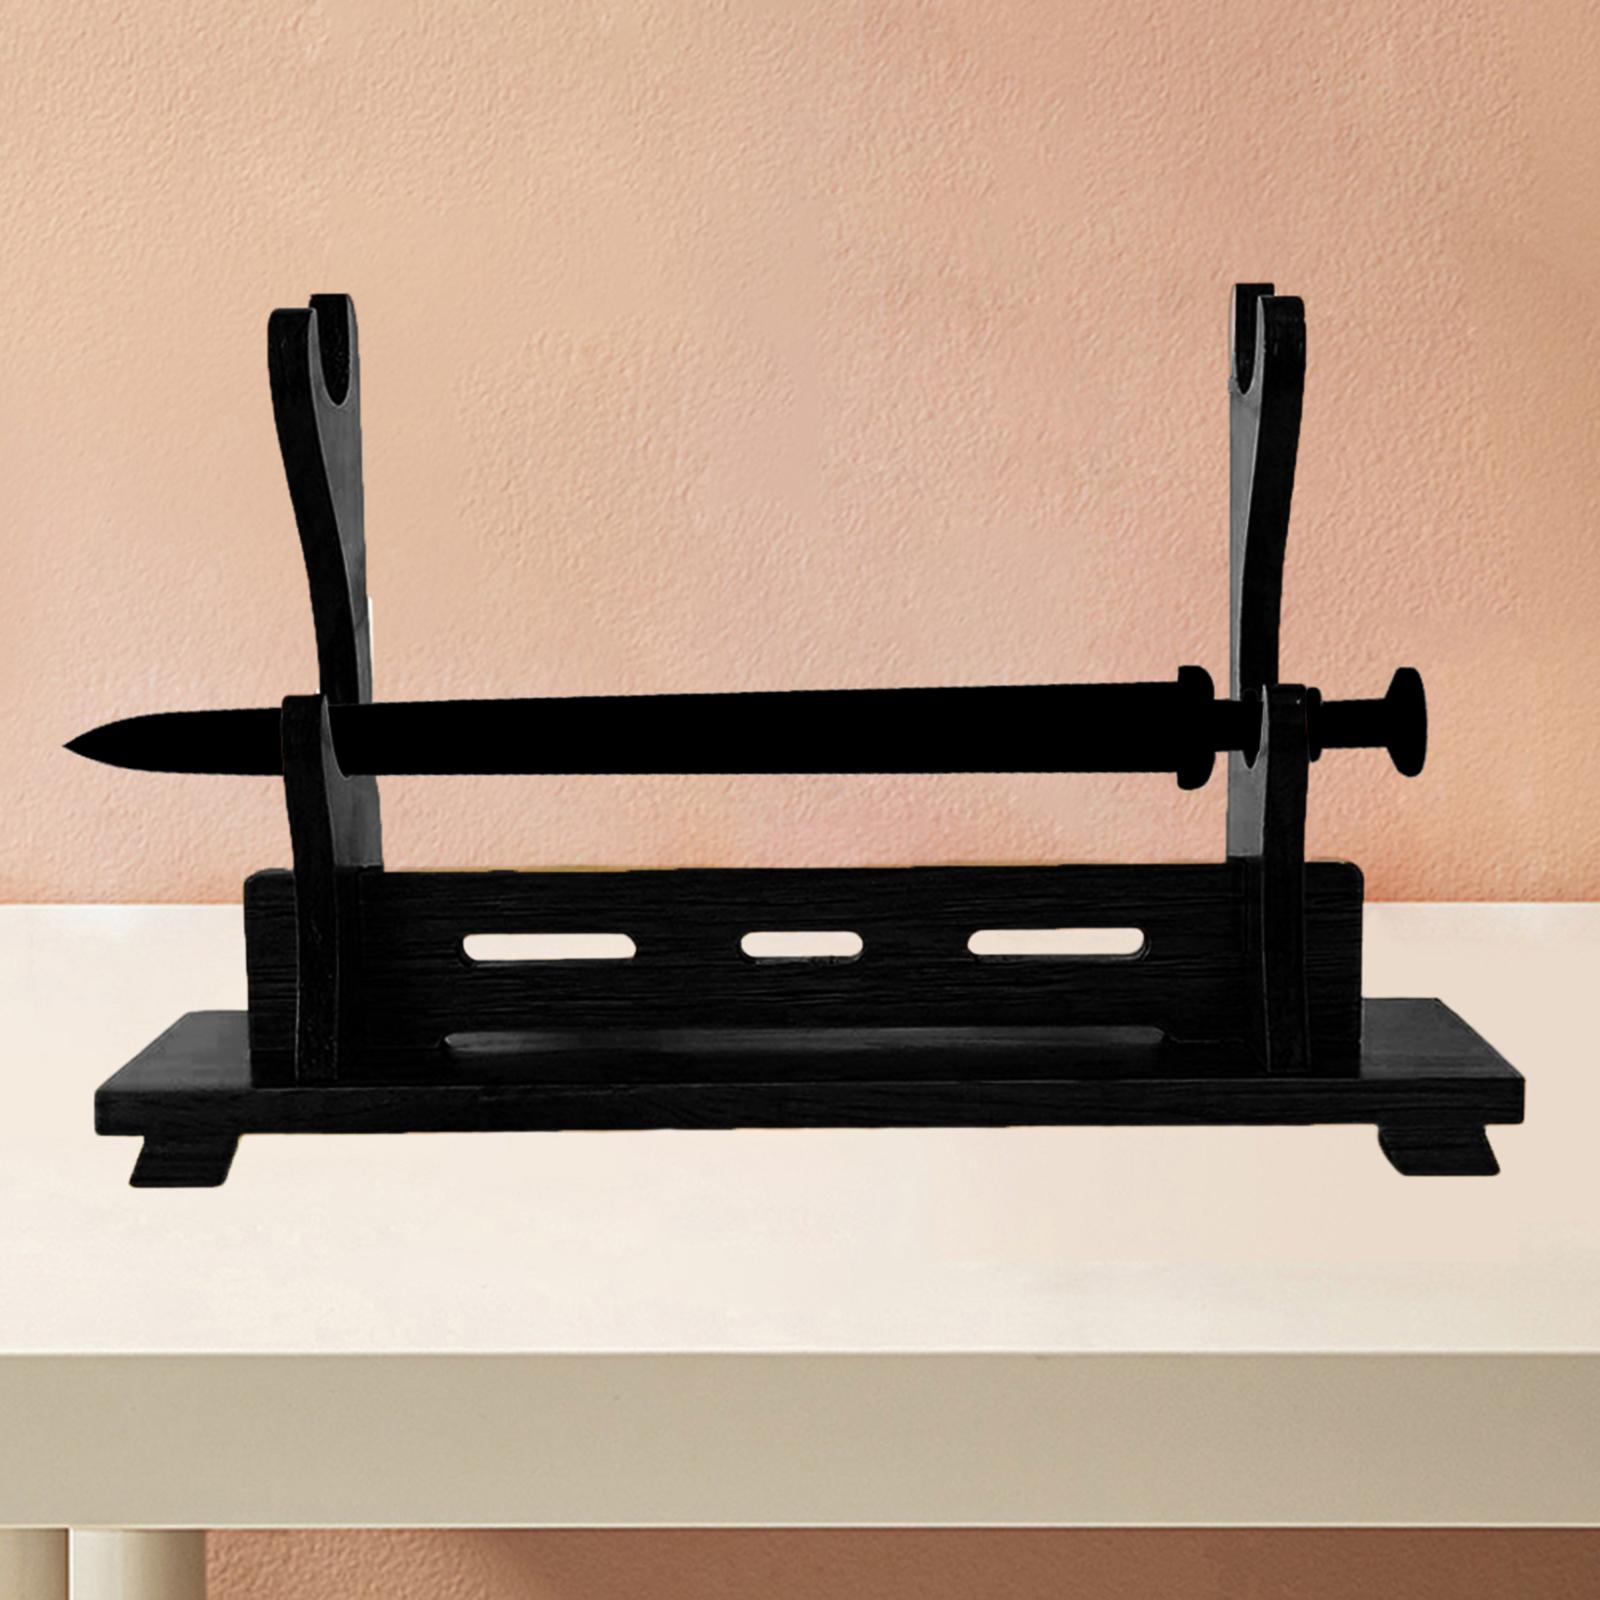 Samurai Accessories Stand Wood Holder Rack Black Placing and Storing Durable 2 Layers